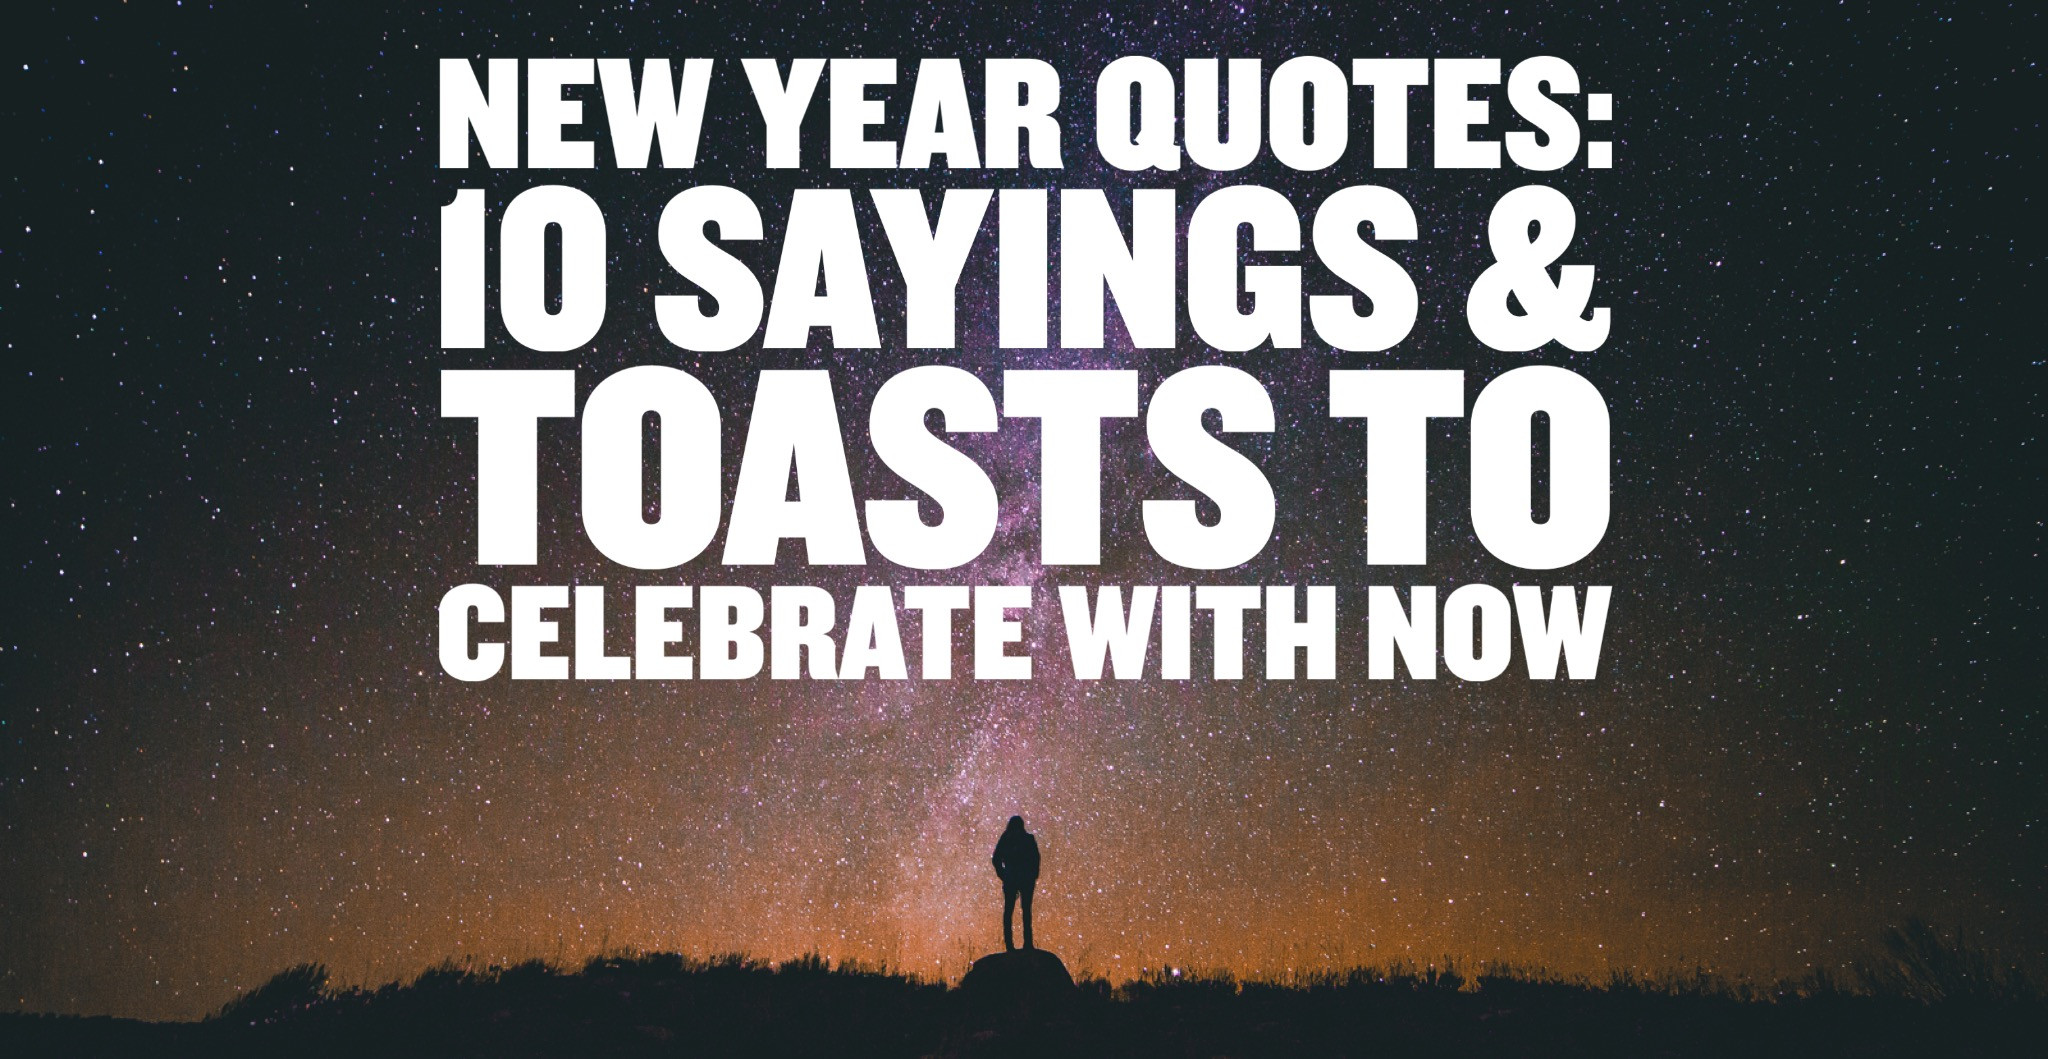 Quotes For New Year
 New Year Quotes 10 Sayings & Toasts To Celebrate With